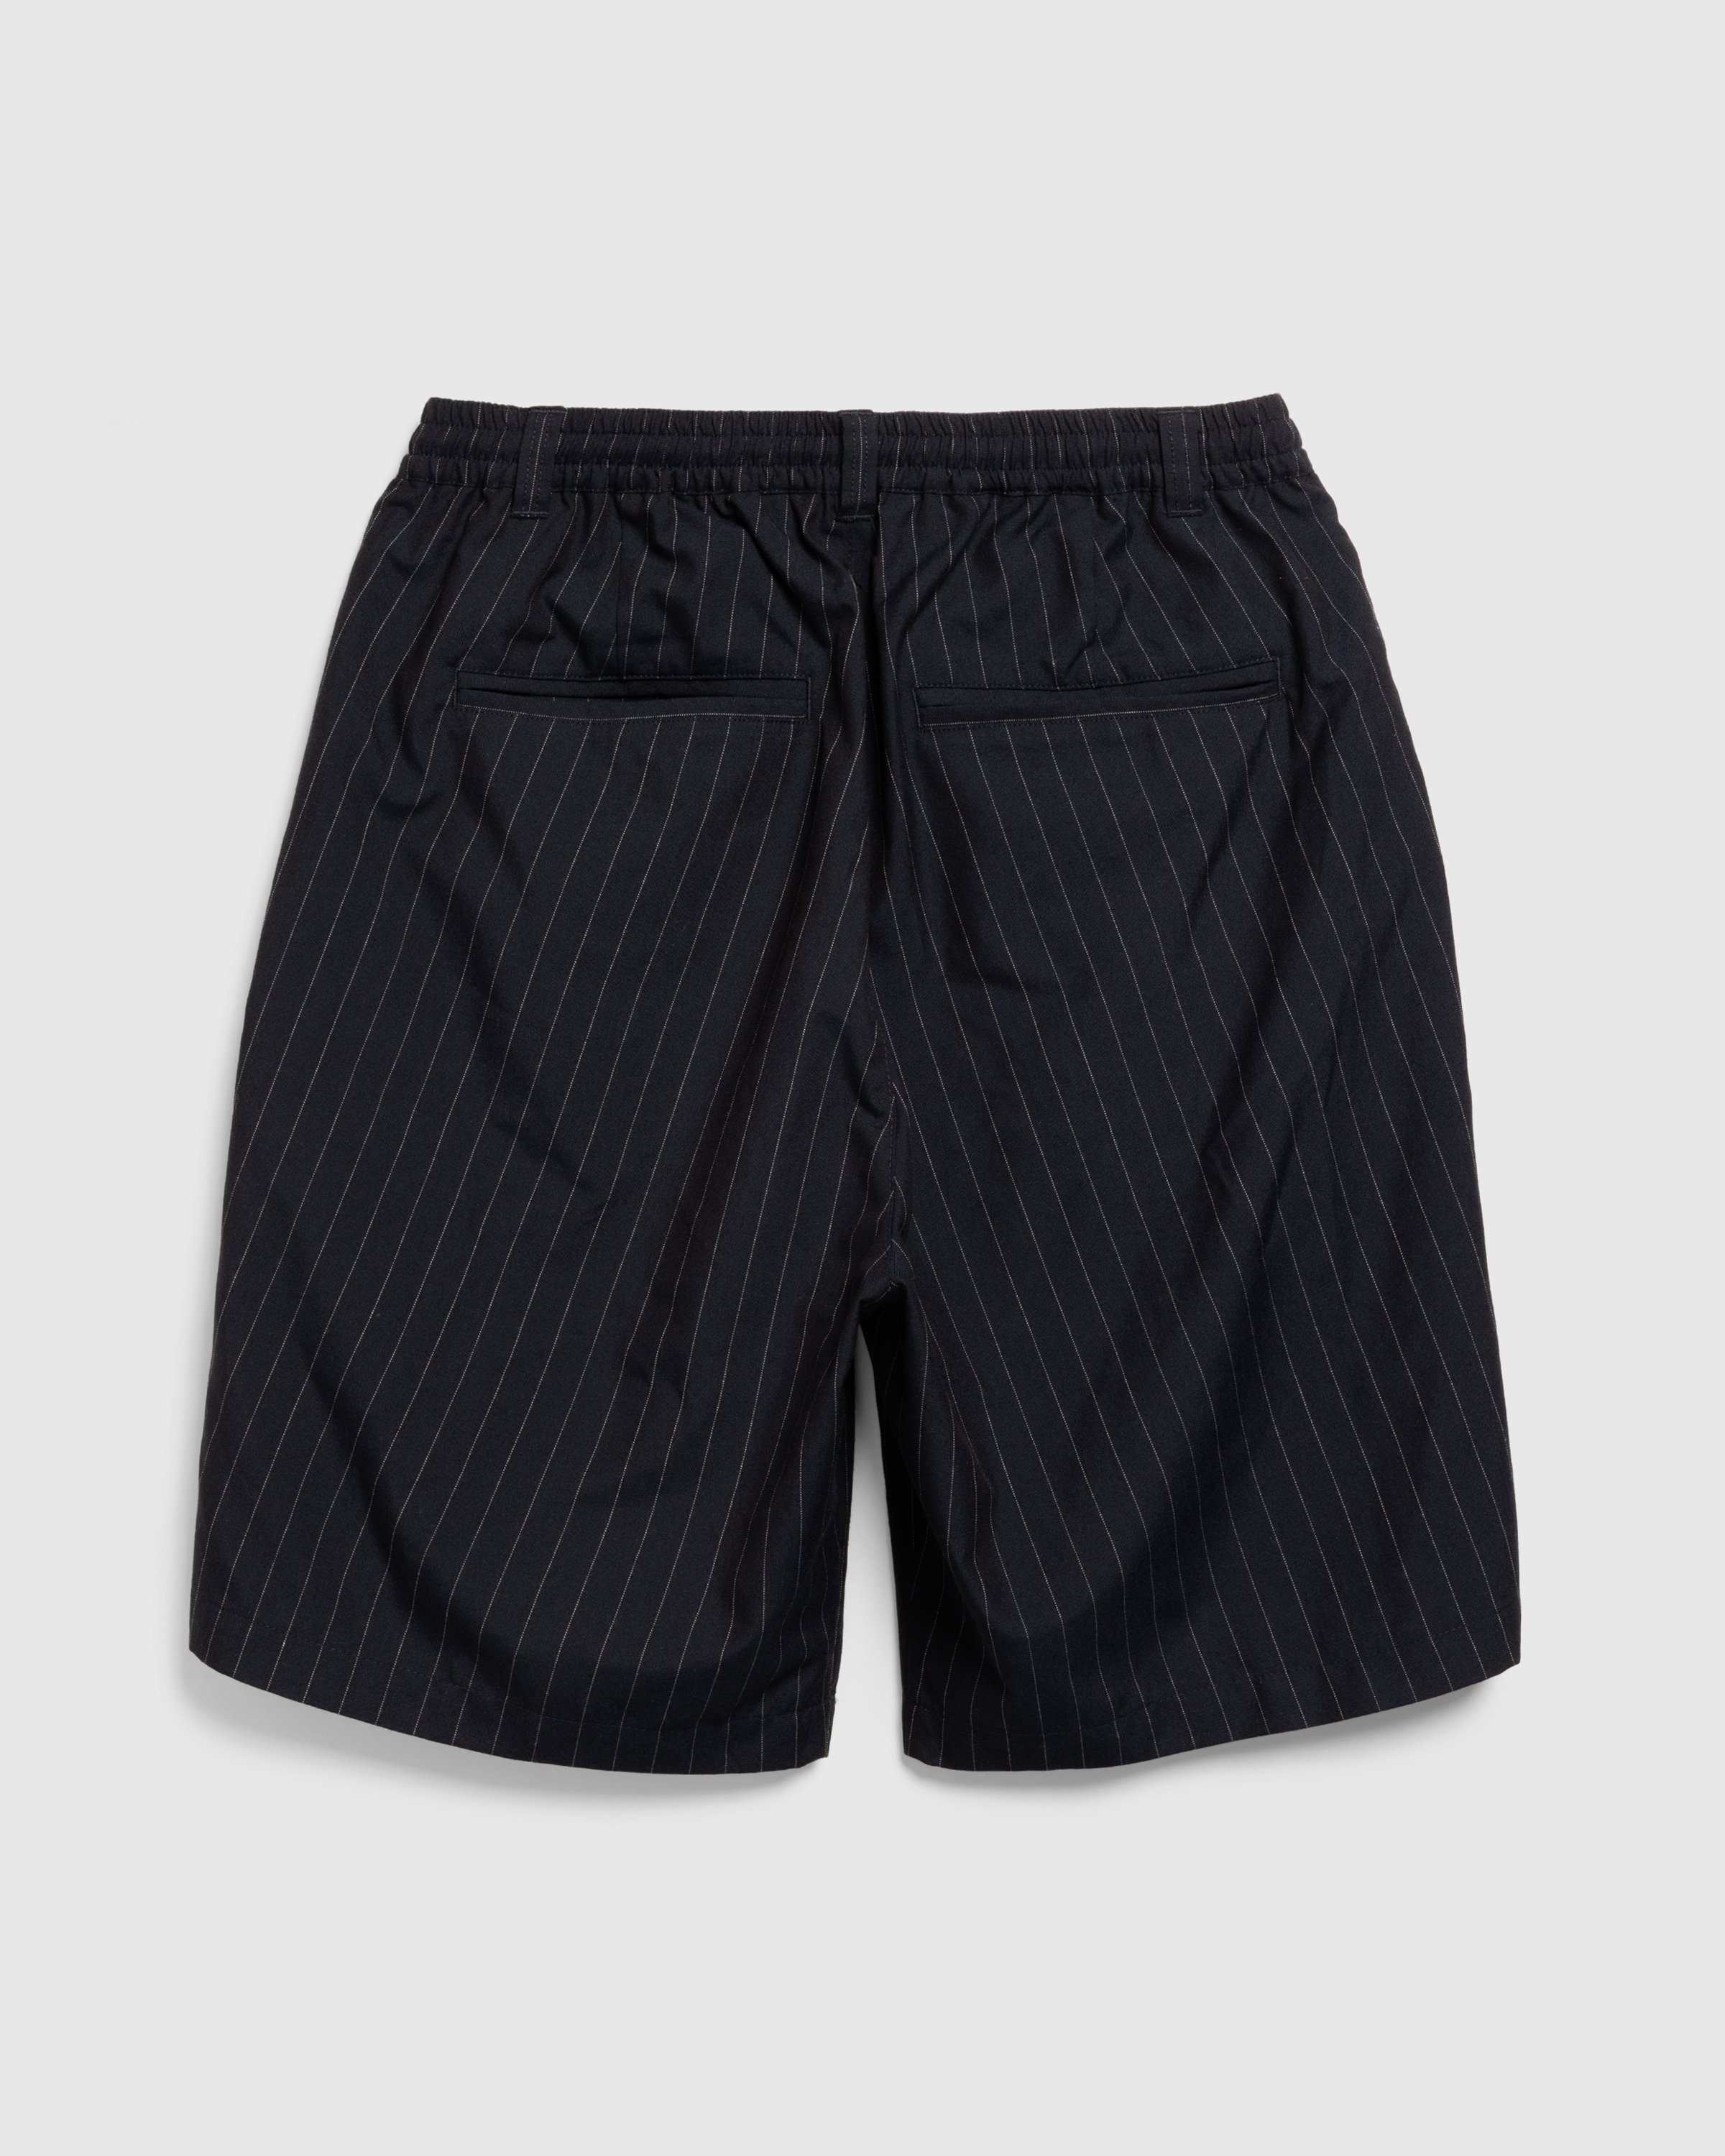 Highsnobiety HS05 - Tropical Suiting Shorts Stripes Navy - Clothing - Stripes Navy - Image 2